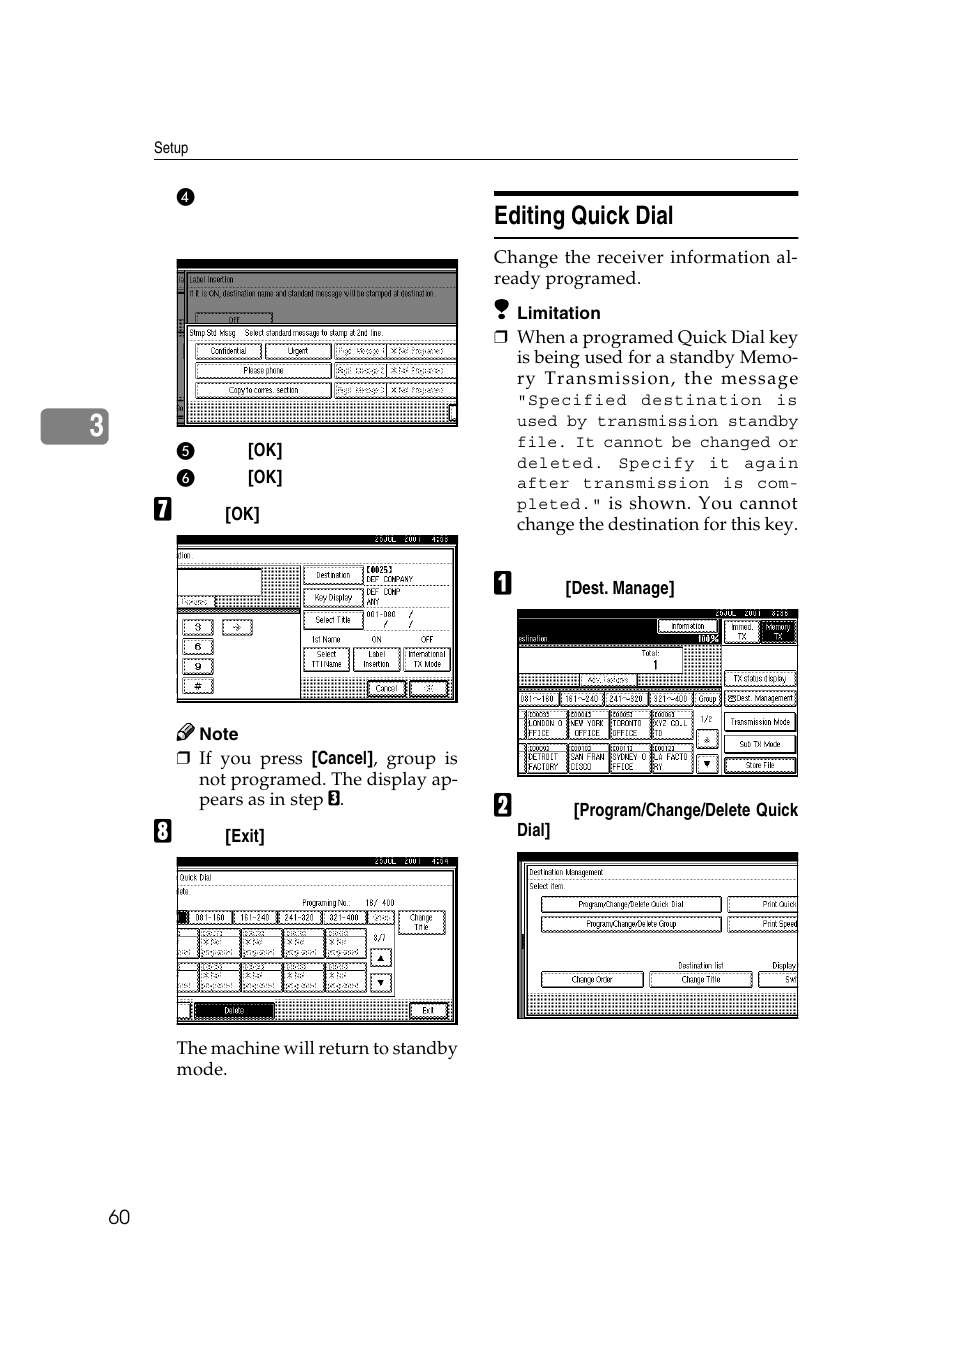 Editing quick dial | LG Option Type 1045 User Manual | Page 68 / 89